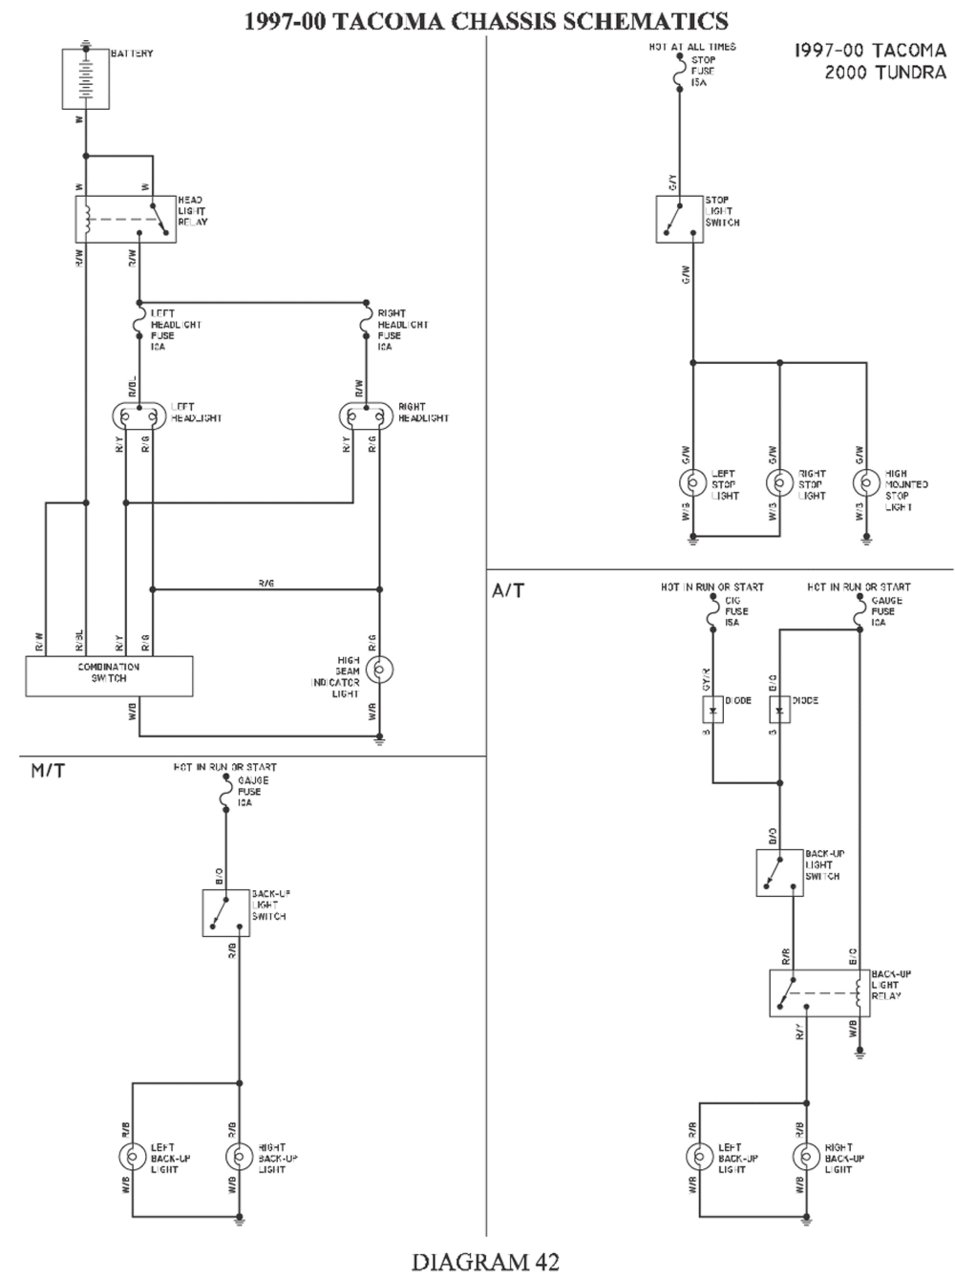 1999 Toyota Tacoma Wiring Diagram from twstatic.net